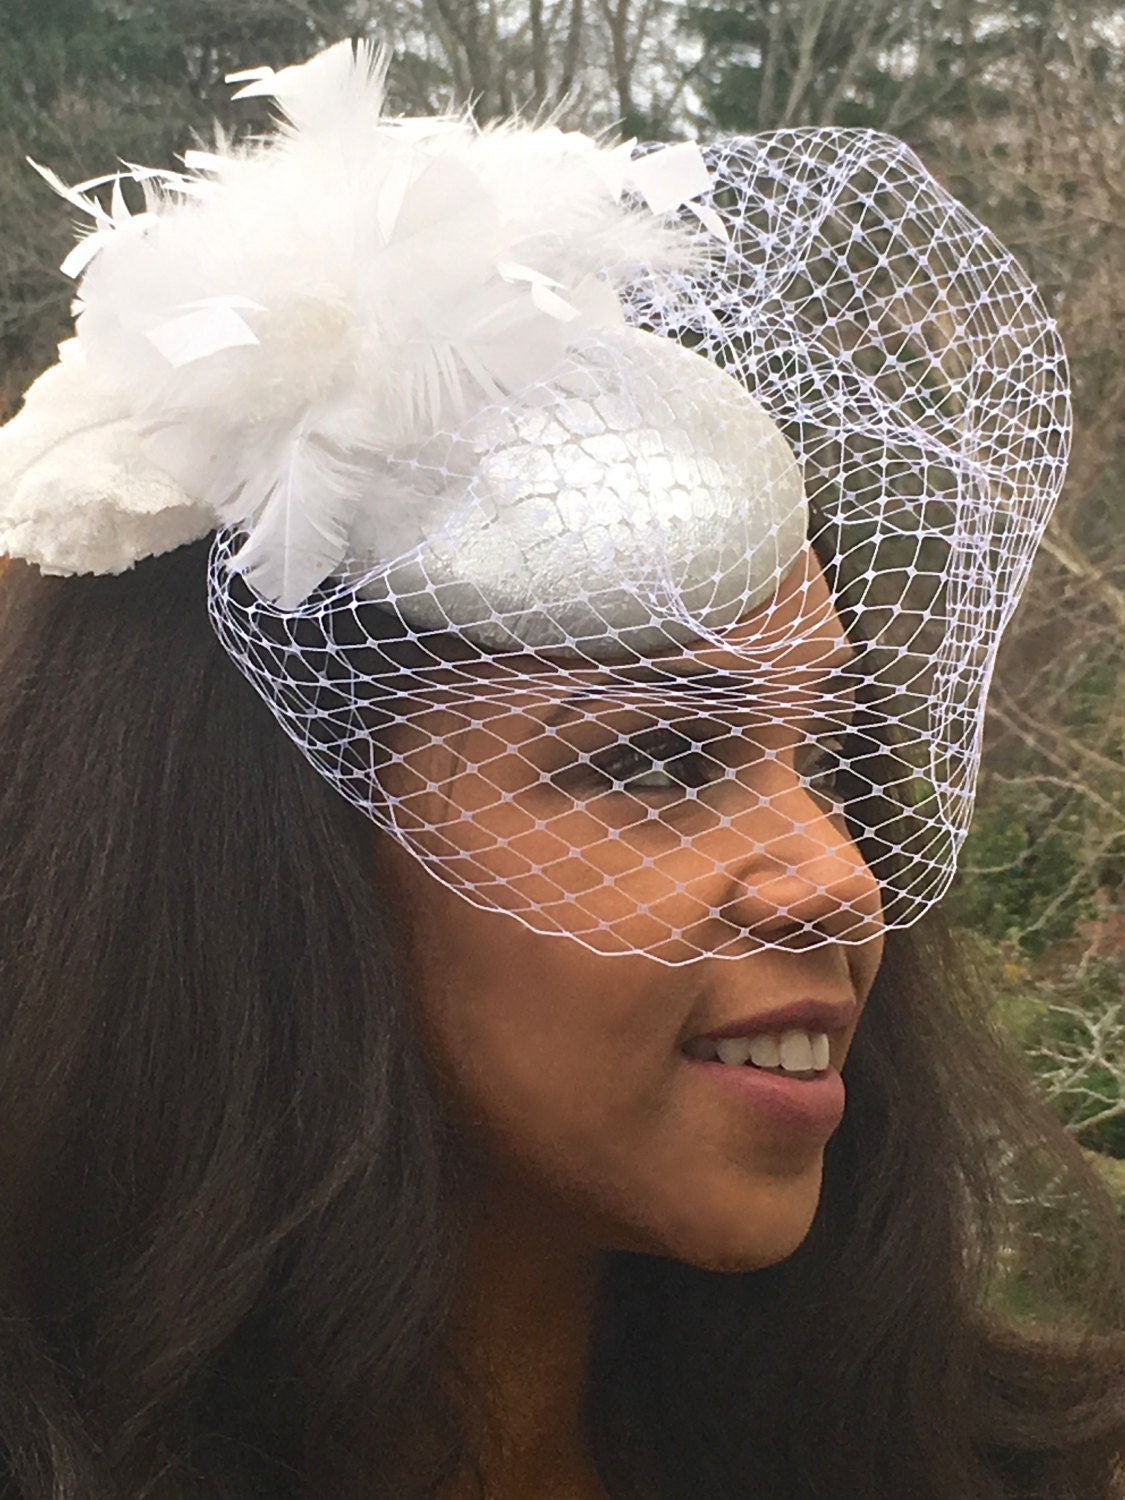 Silver metallic Leather Croc Embossed Fascinator with White Feather Cluster and White veiling- Bridal Headpiece-Wedding-Races Hat-Prom-Party